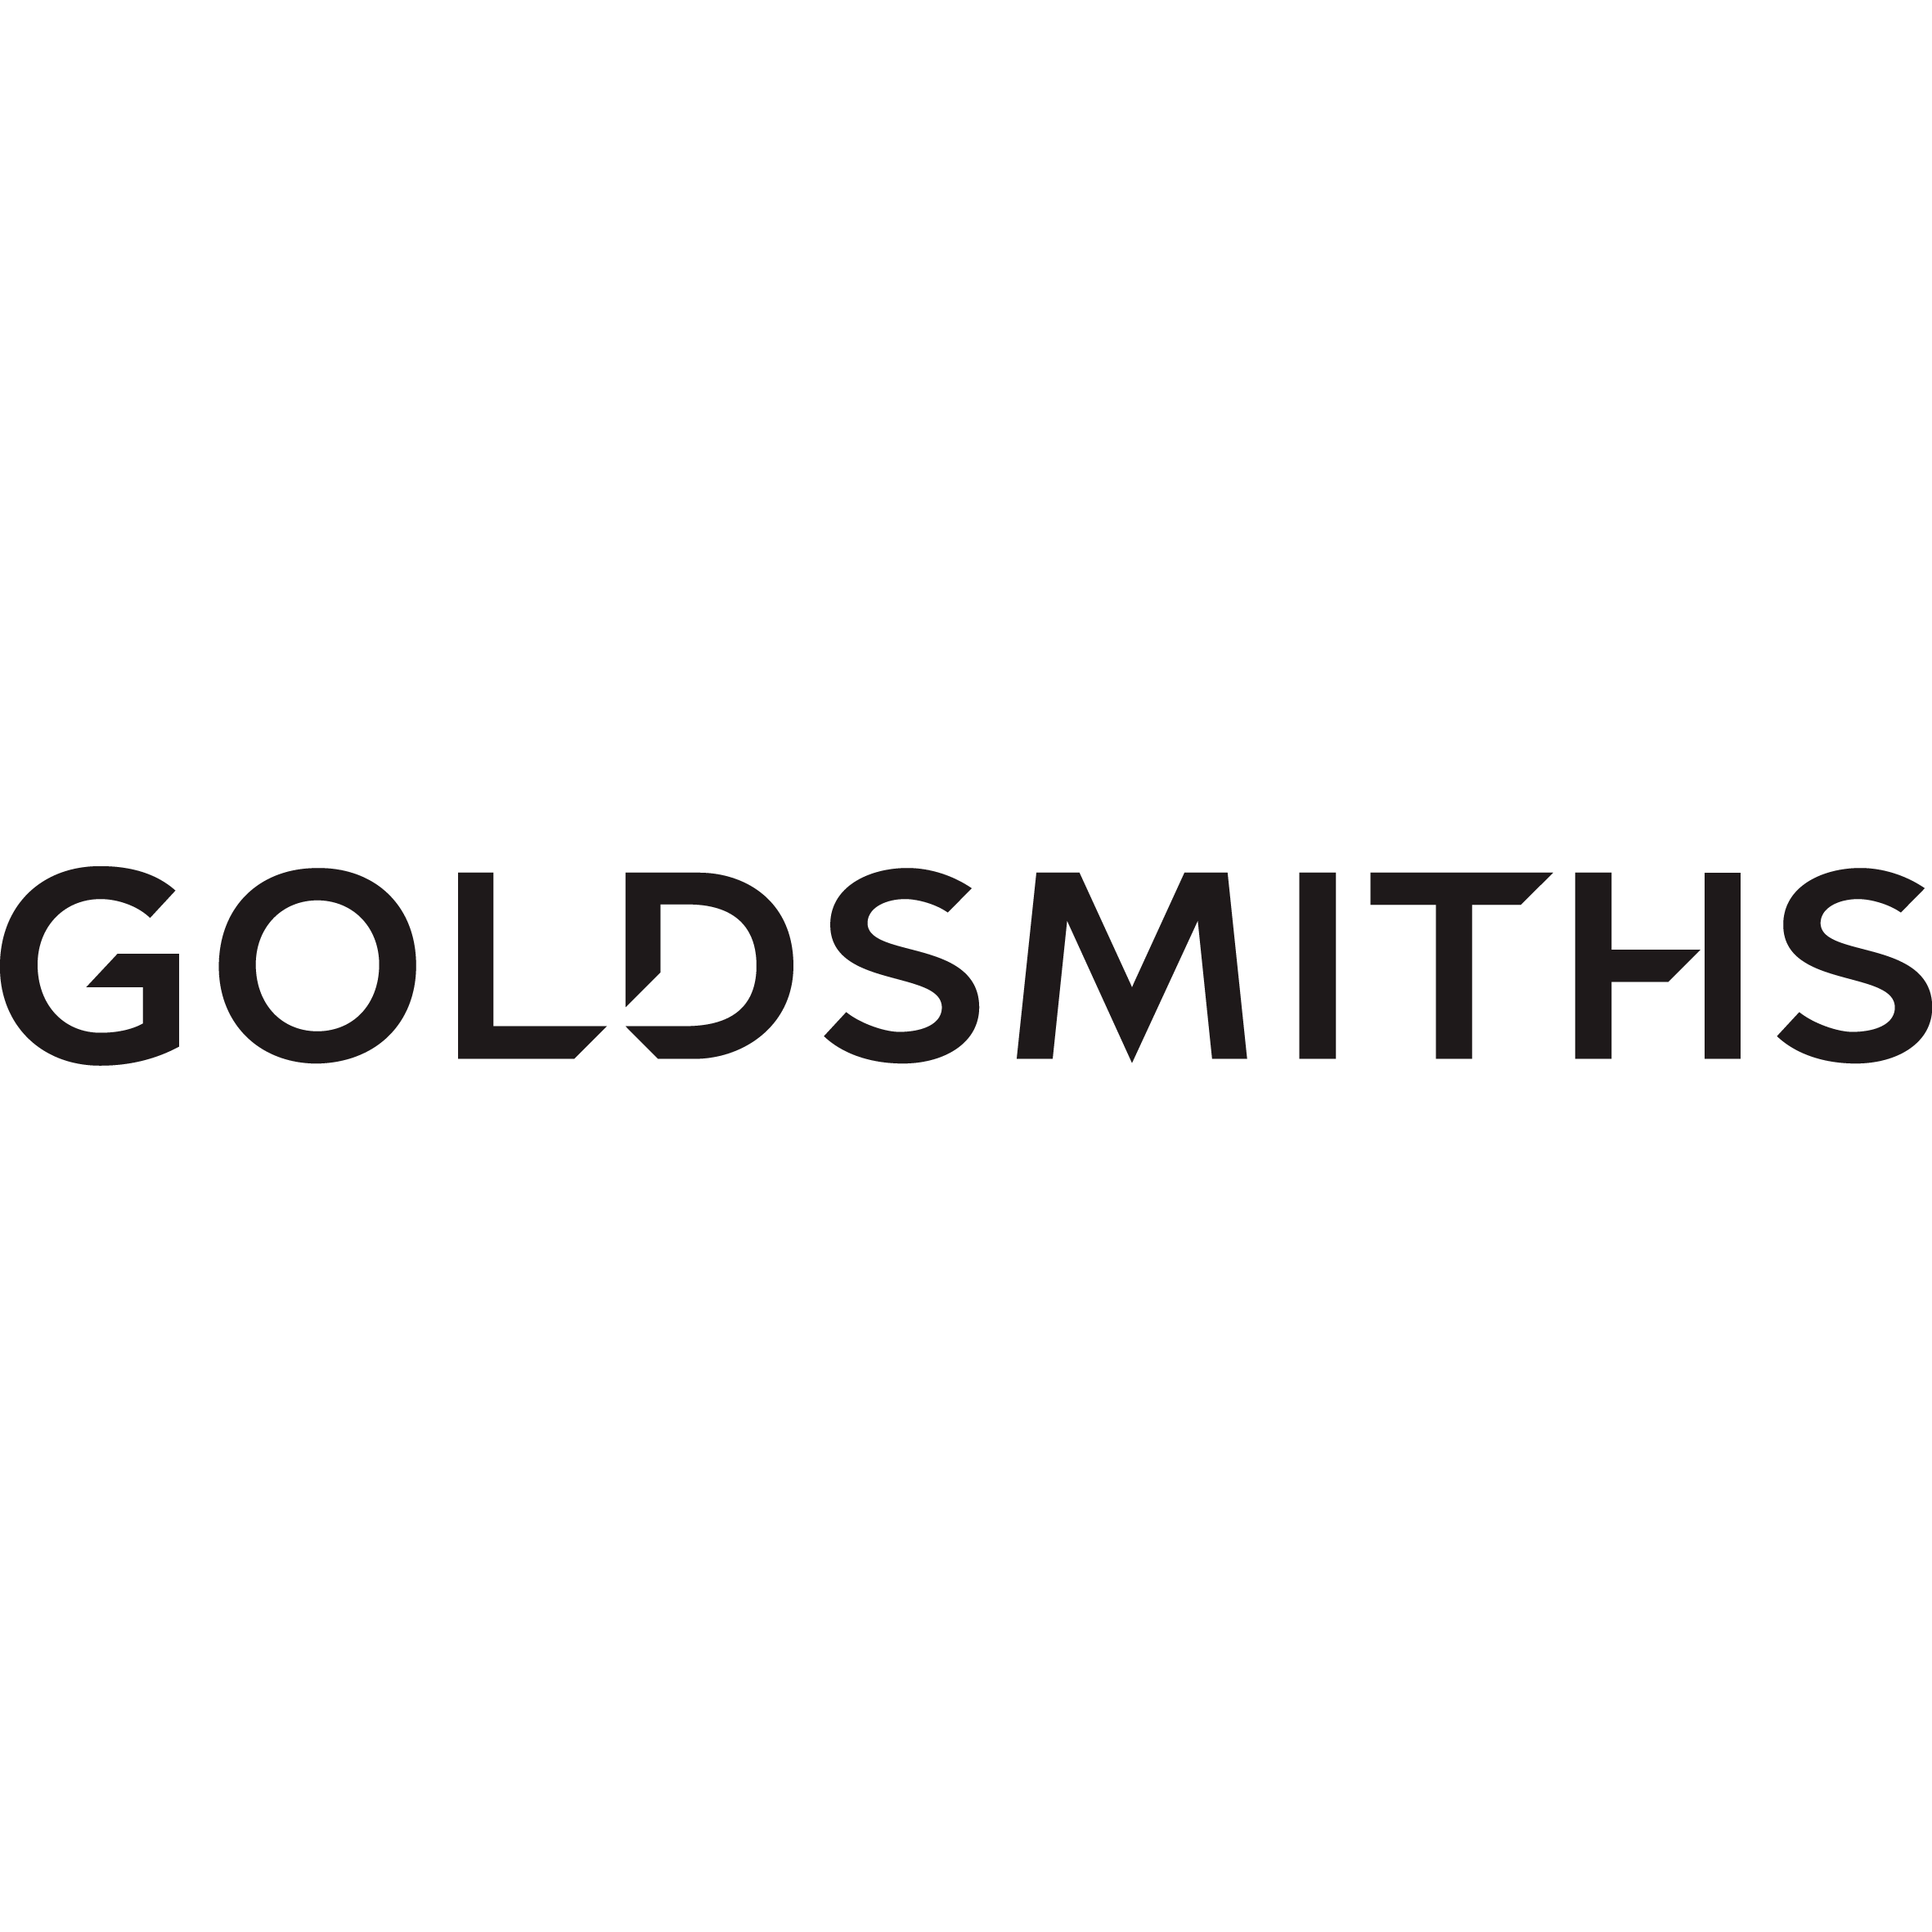 Goldsmiths - Leicester, Leicestershire LE1 4FT - 01162 620909 | ShowMeLocal.com